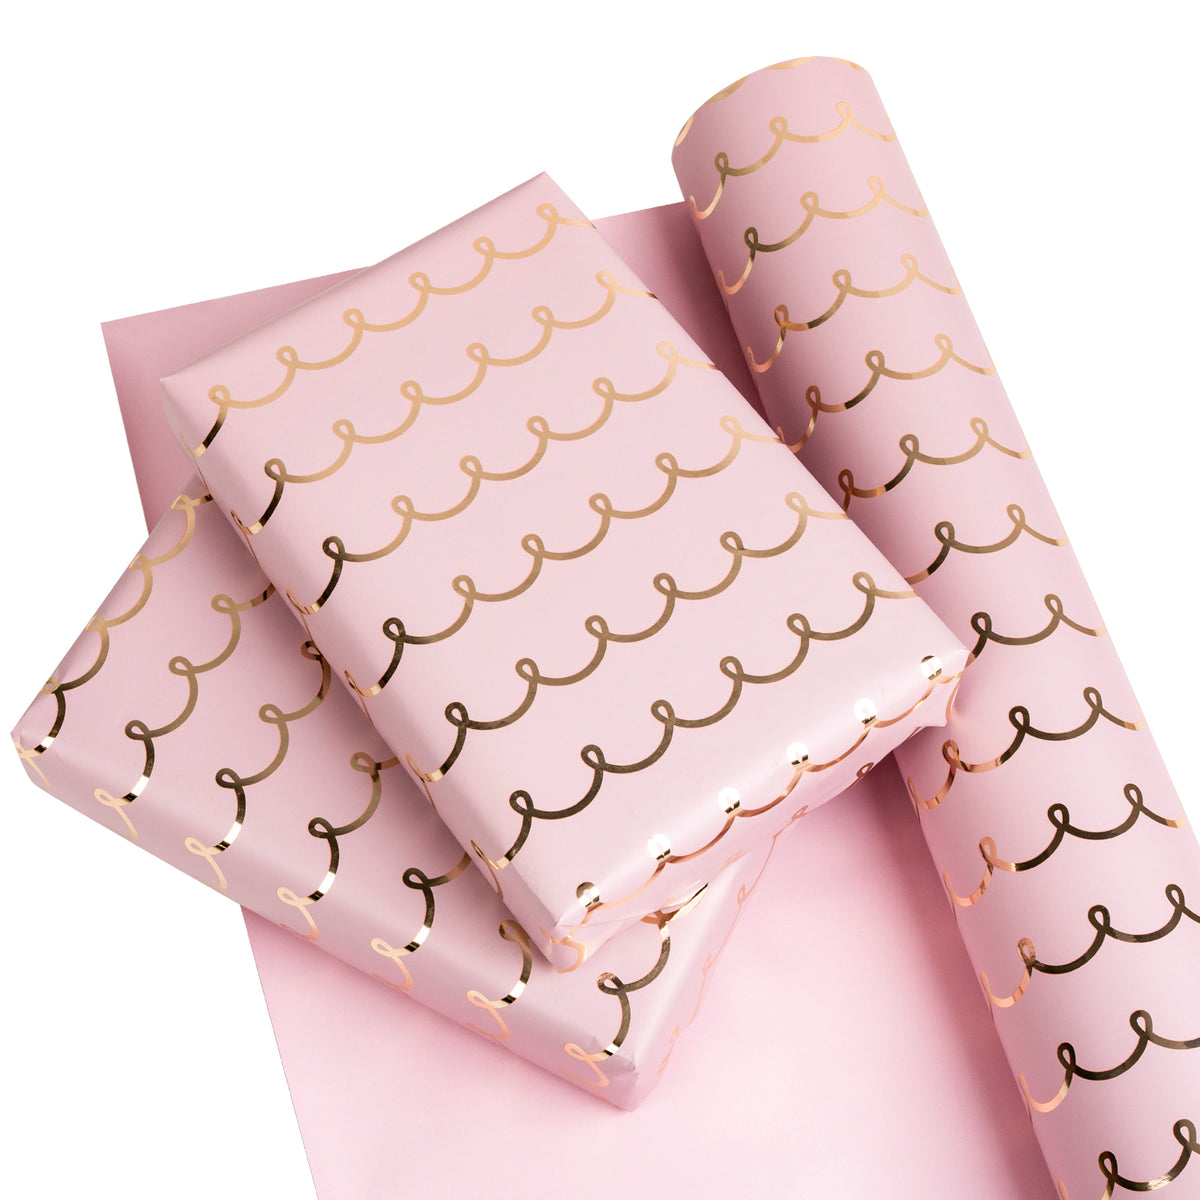  LeZakaa Reversible Christmas Wrapping Paper - Jumbo Roll -  Bear, Penguins & Polak Dots in Pink - 24 inches x 100 Feet (200 sq.ft.) :  Health & Household